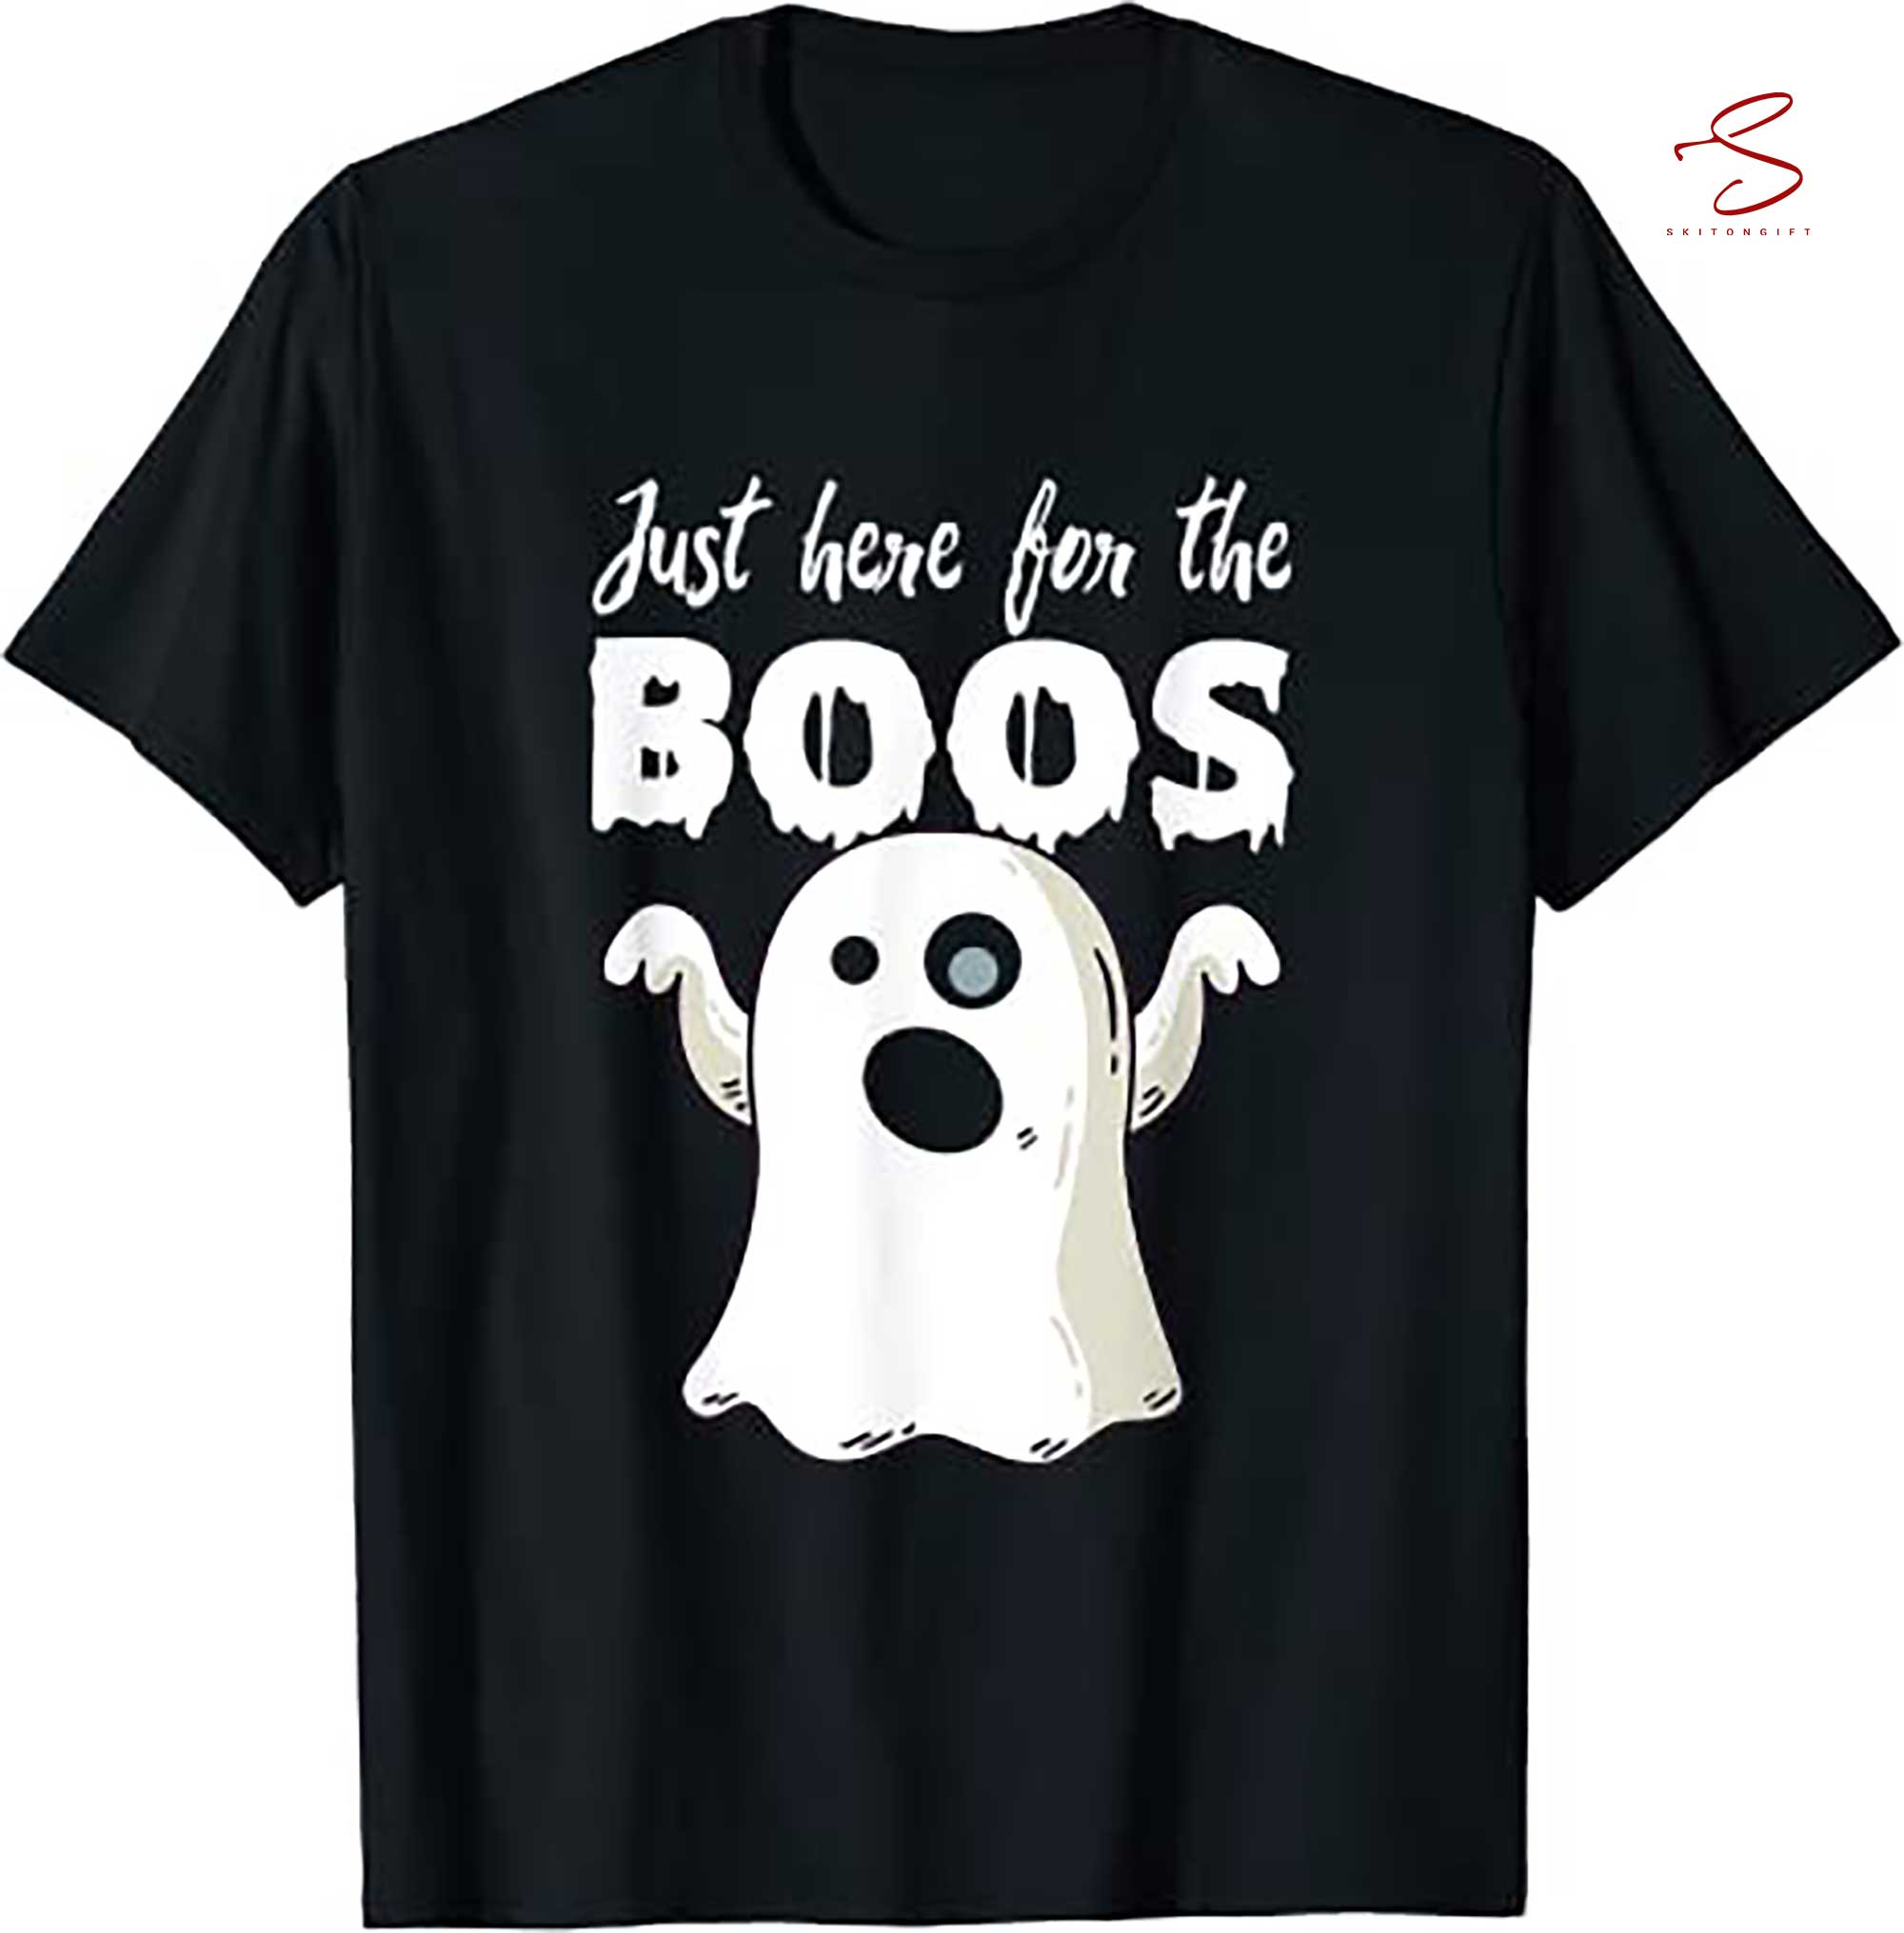 Skitongift Just Here For The Boos Scary Boo Ghost Costume Halloween T Shirt